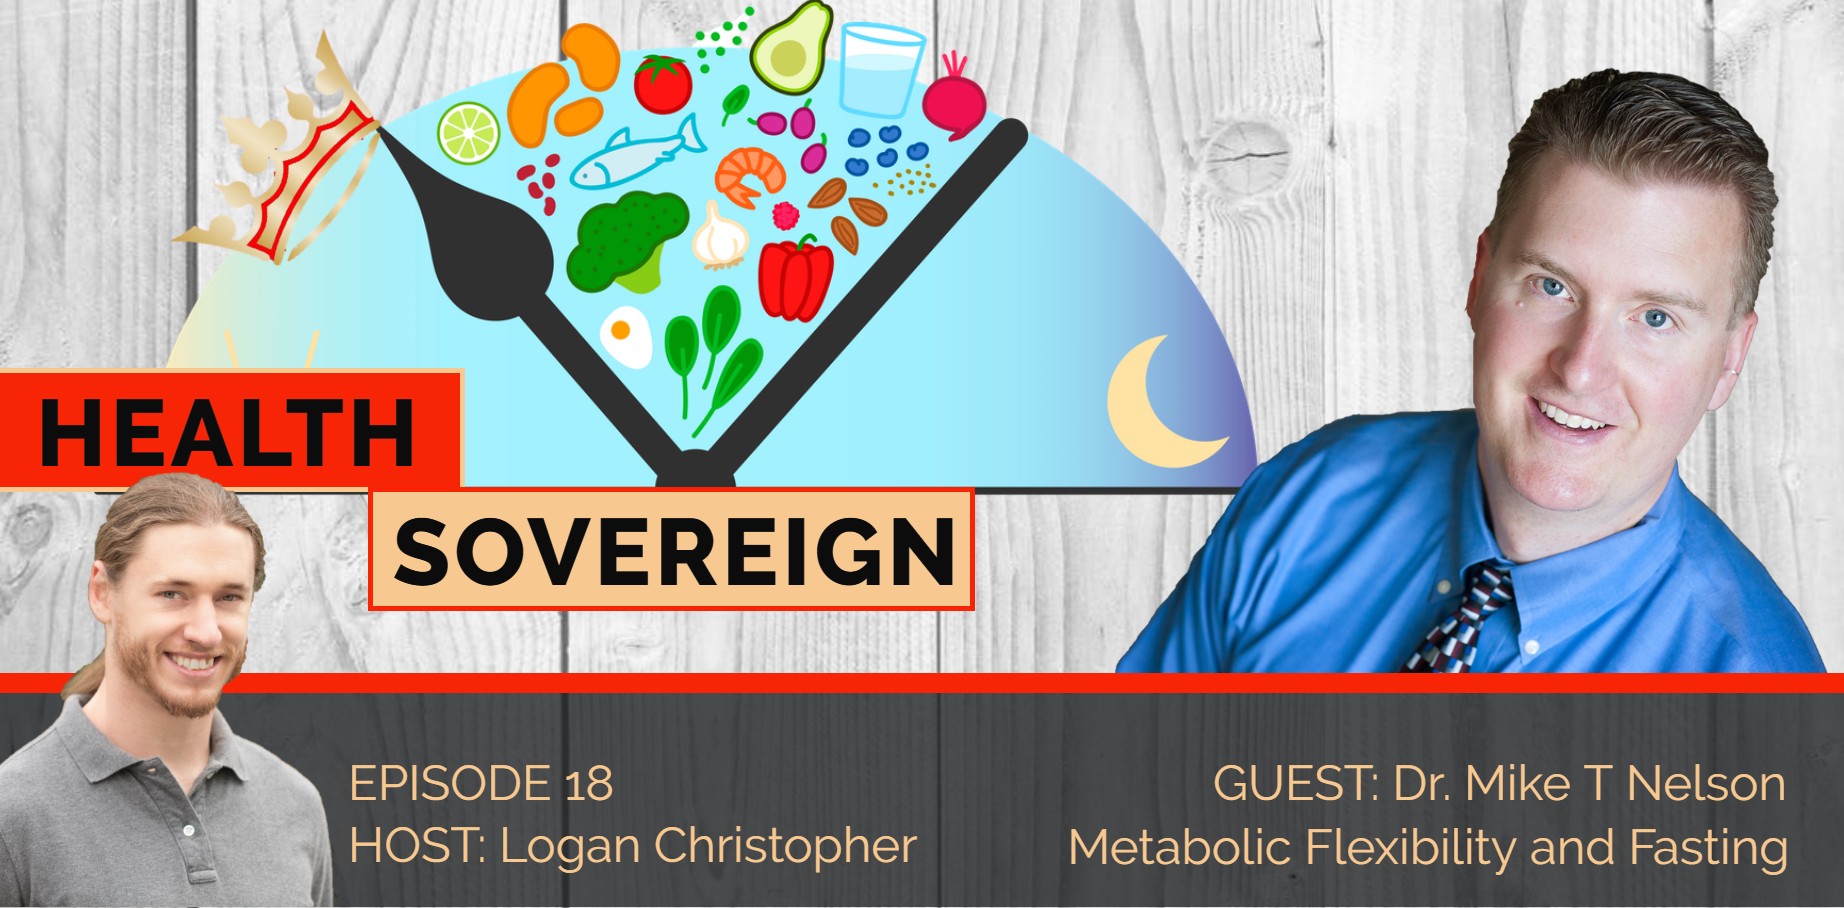 Episode 18: Metabolic Flexibility and Fasting with Dr. Mike T Nelson